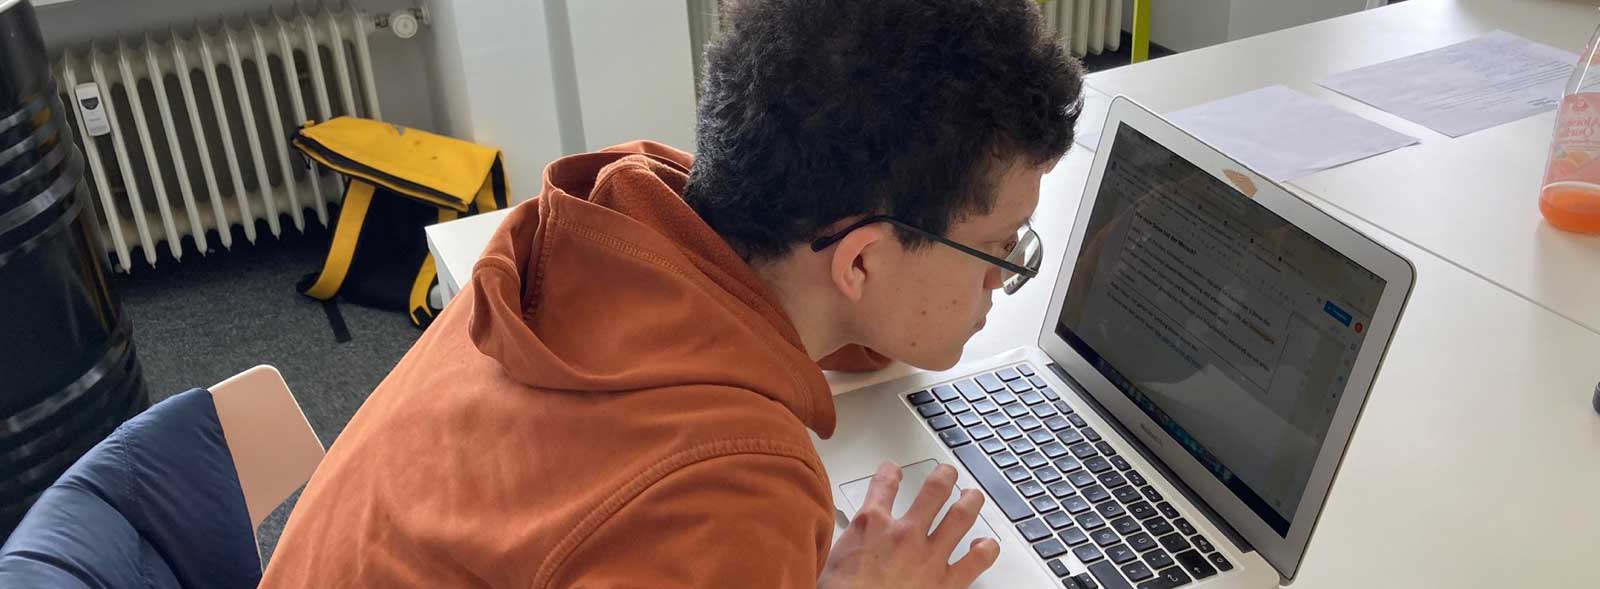 german student reading the training content on the screen